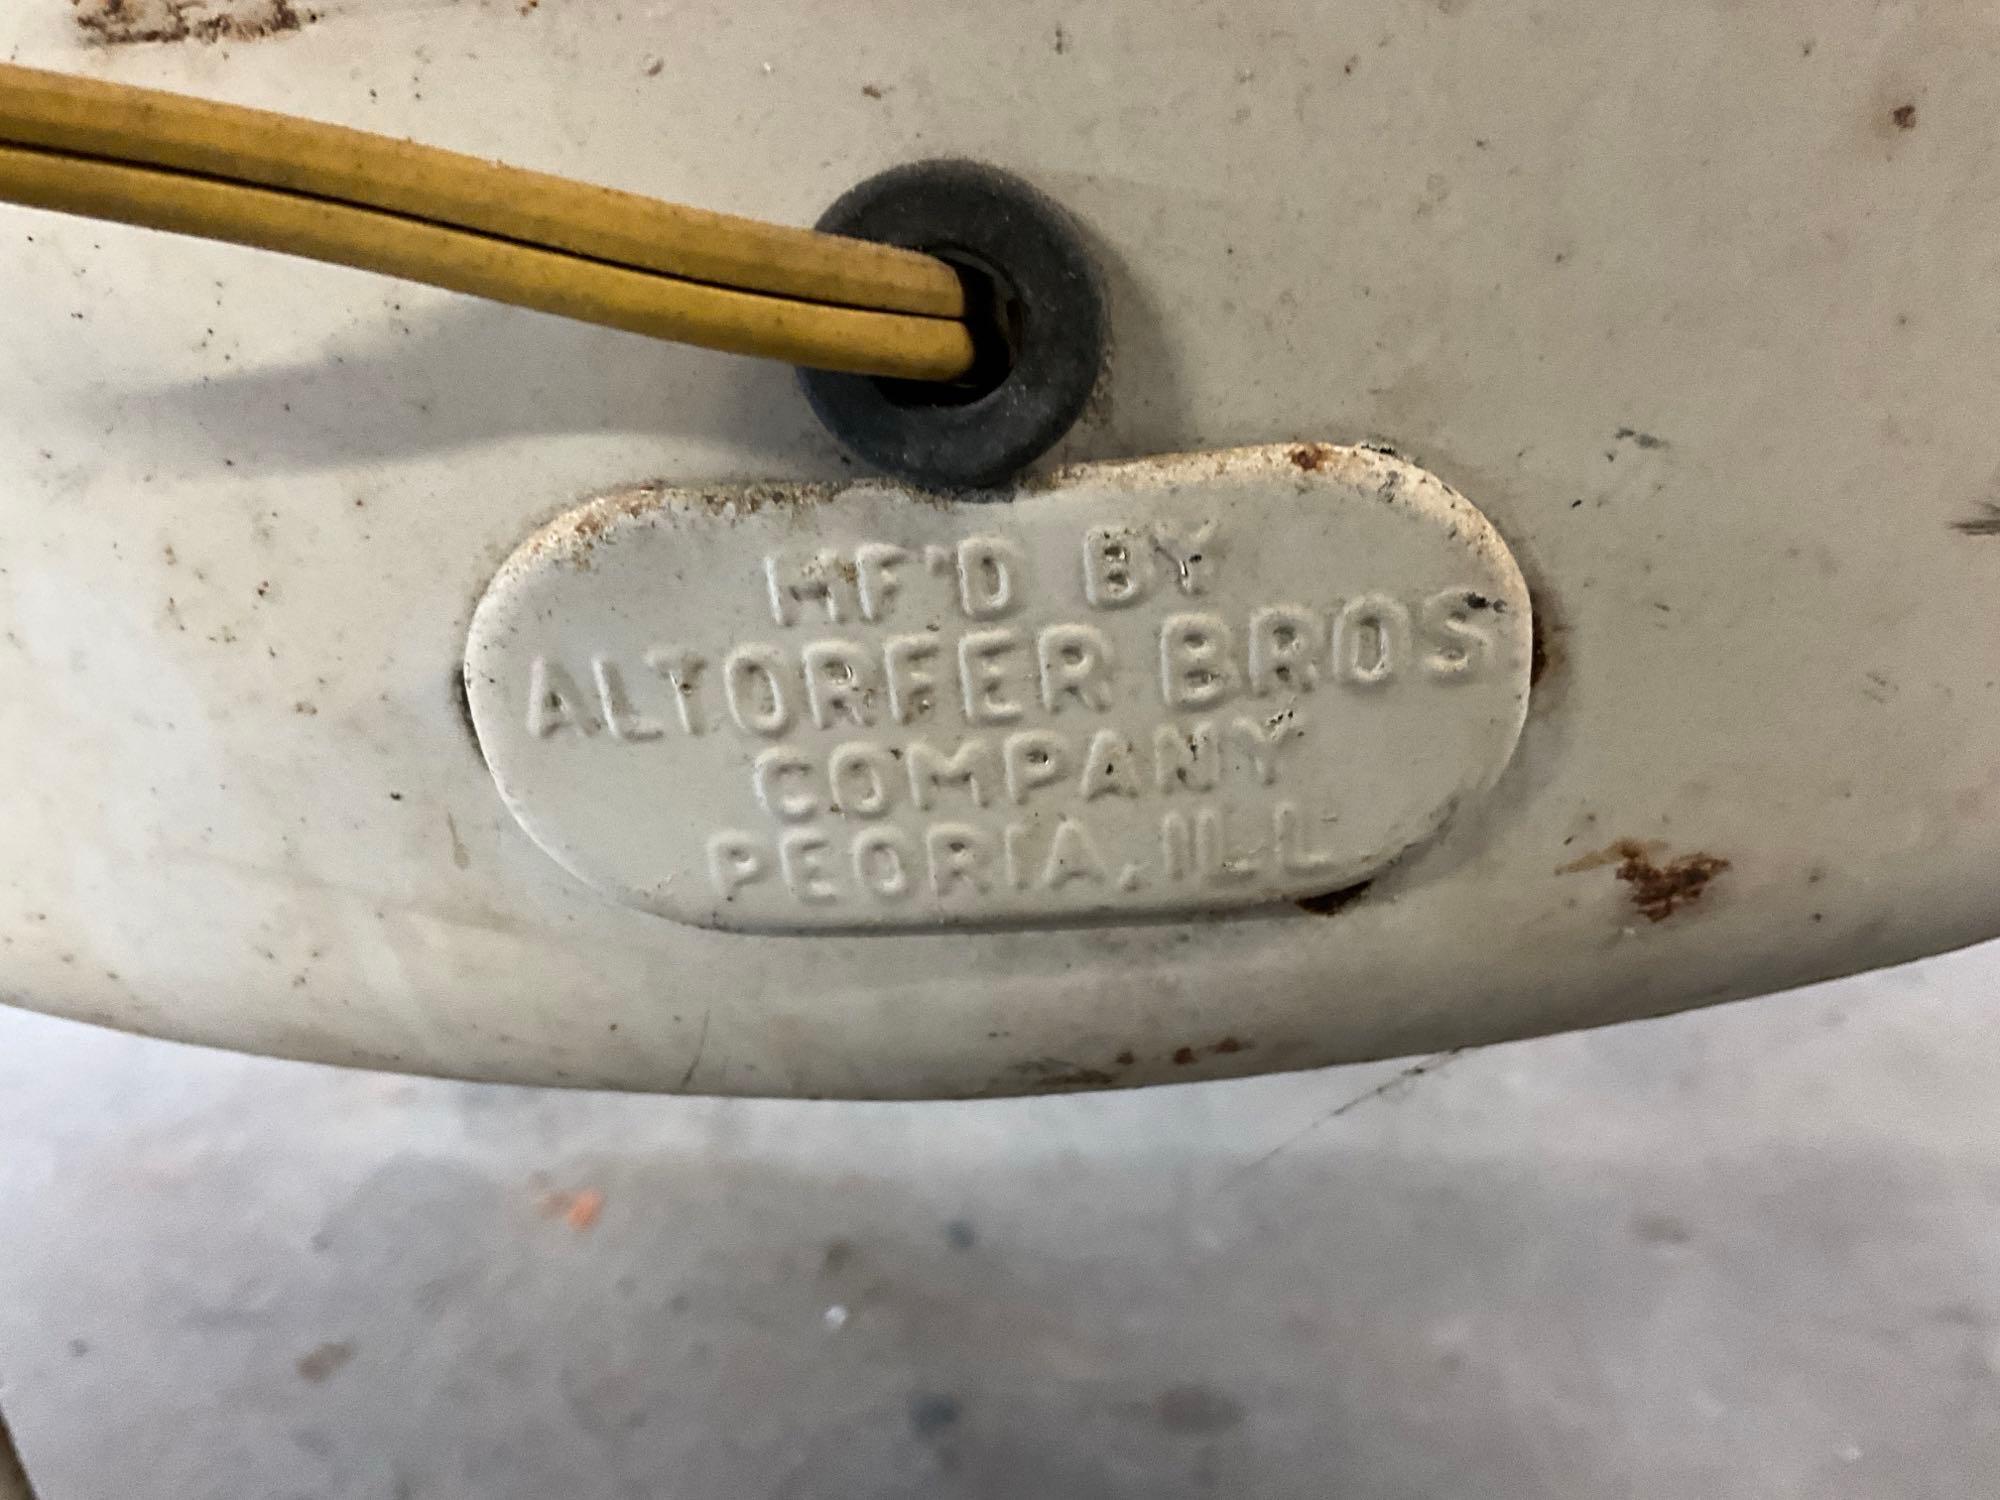 Altorfer Bros Co, Peoria, IL wringer washing machine on rollers